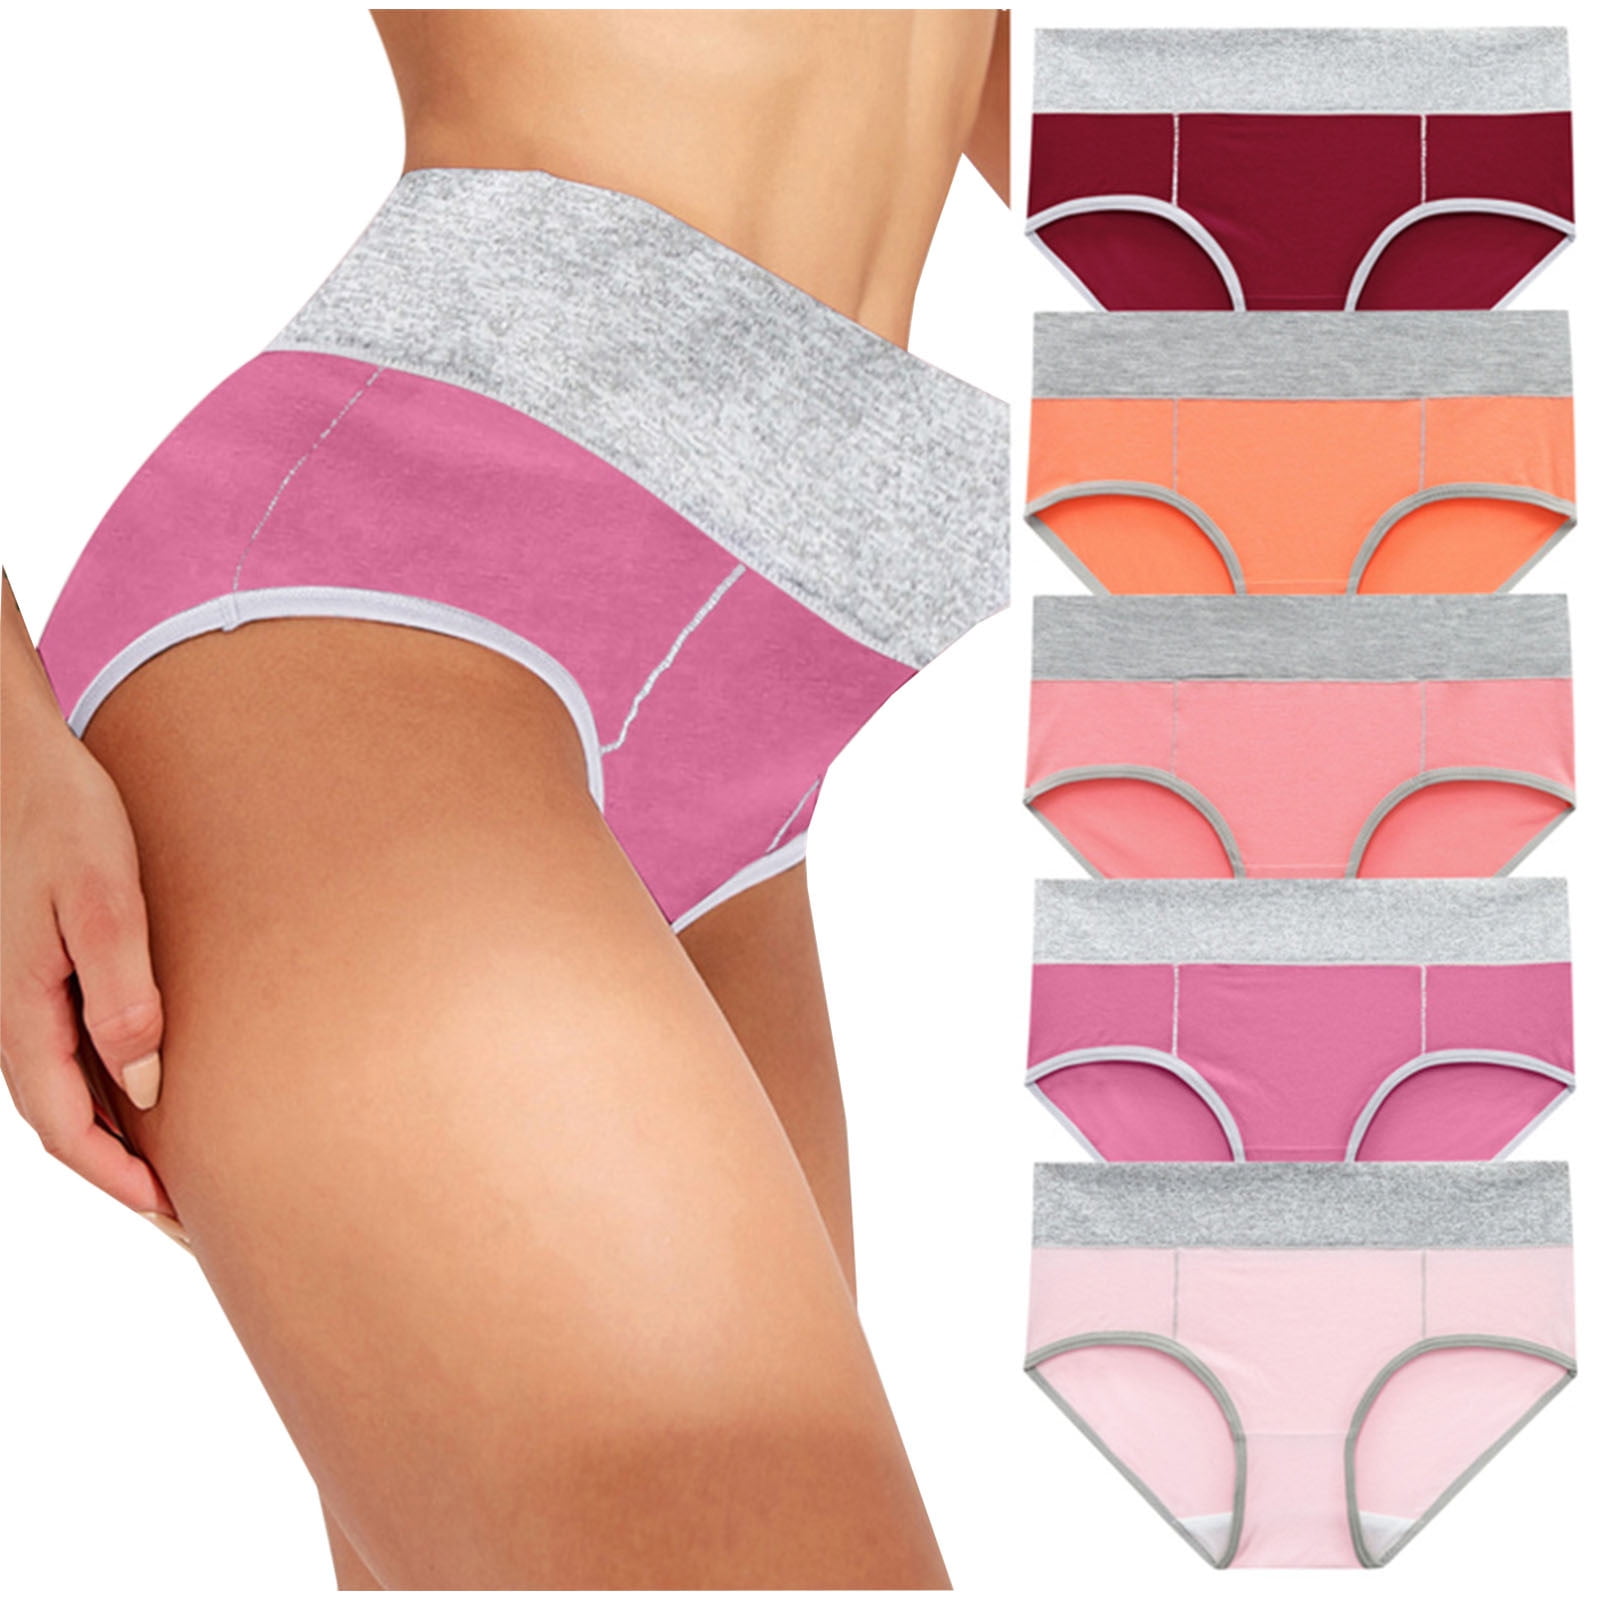 5-Pack Plus Size Underwear for Women High Waisted Soft Breathable Stretch Briefs Underpants Ladies Panties 